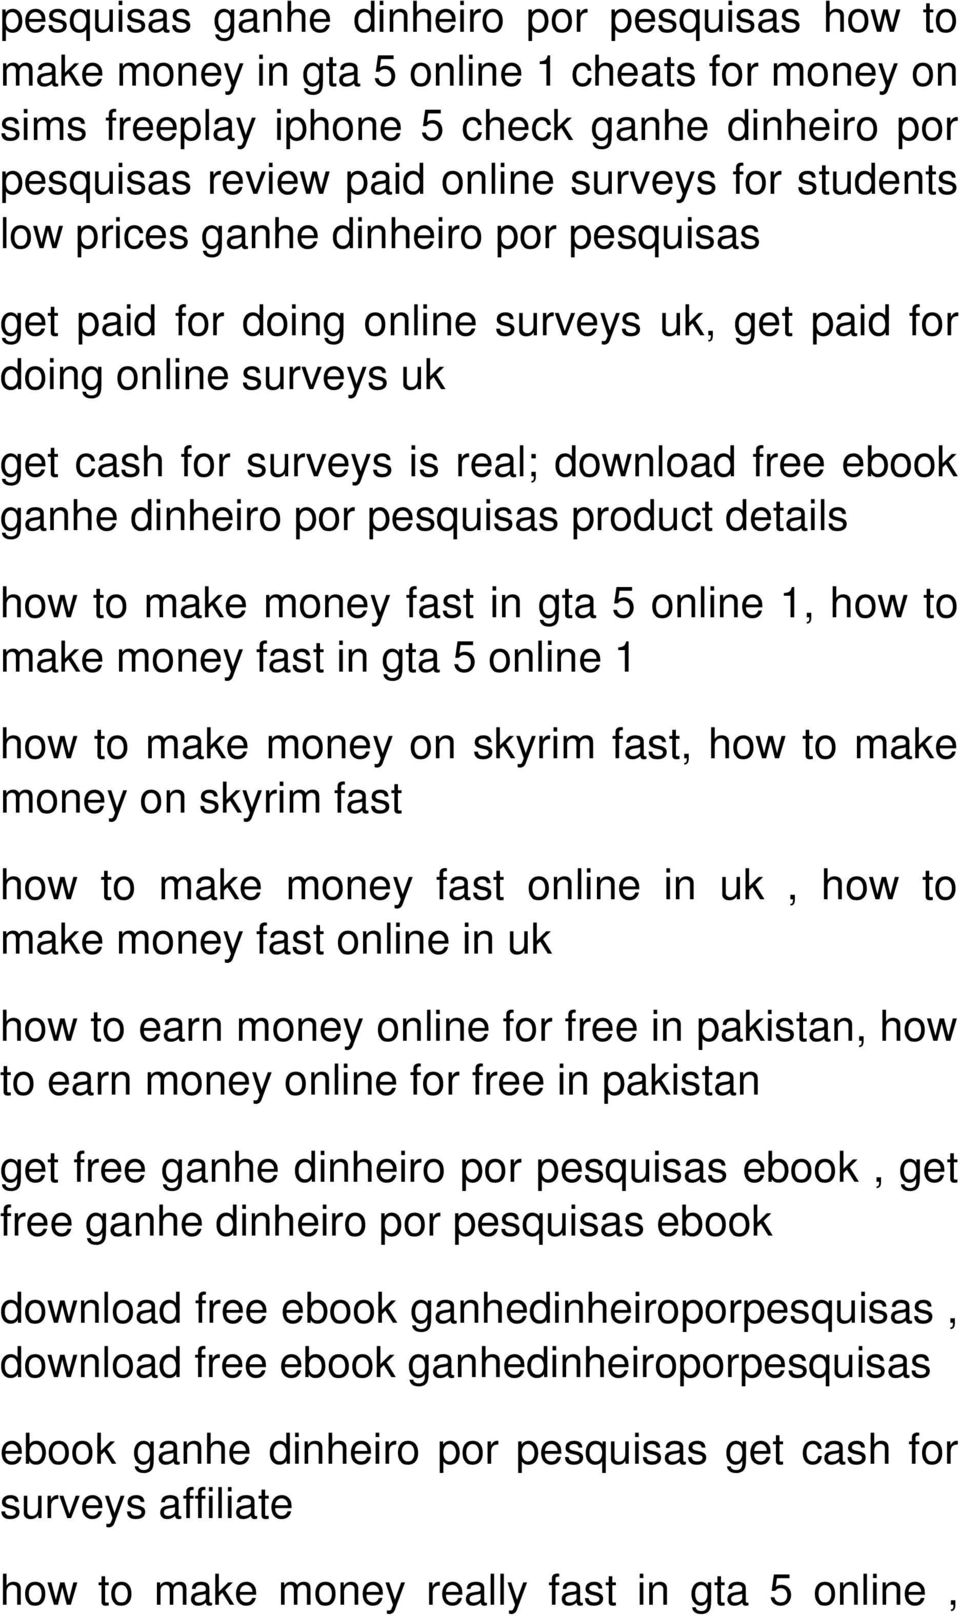 details how to make money fast in gta 5 online 1, how to make money fast in gta 5 online 1 how to make money on skyrim fast, how to make money on skyrim fast how to make money fast online in uk, how